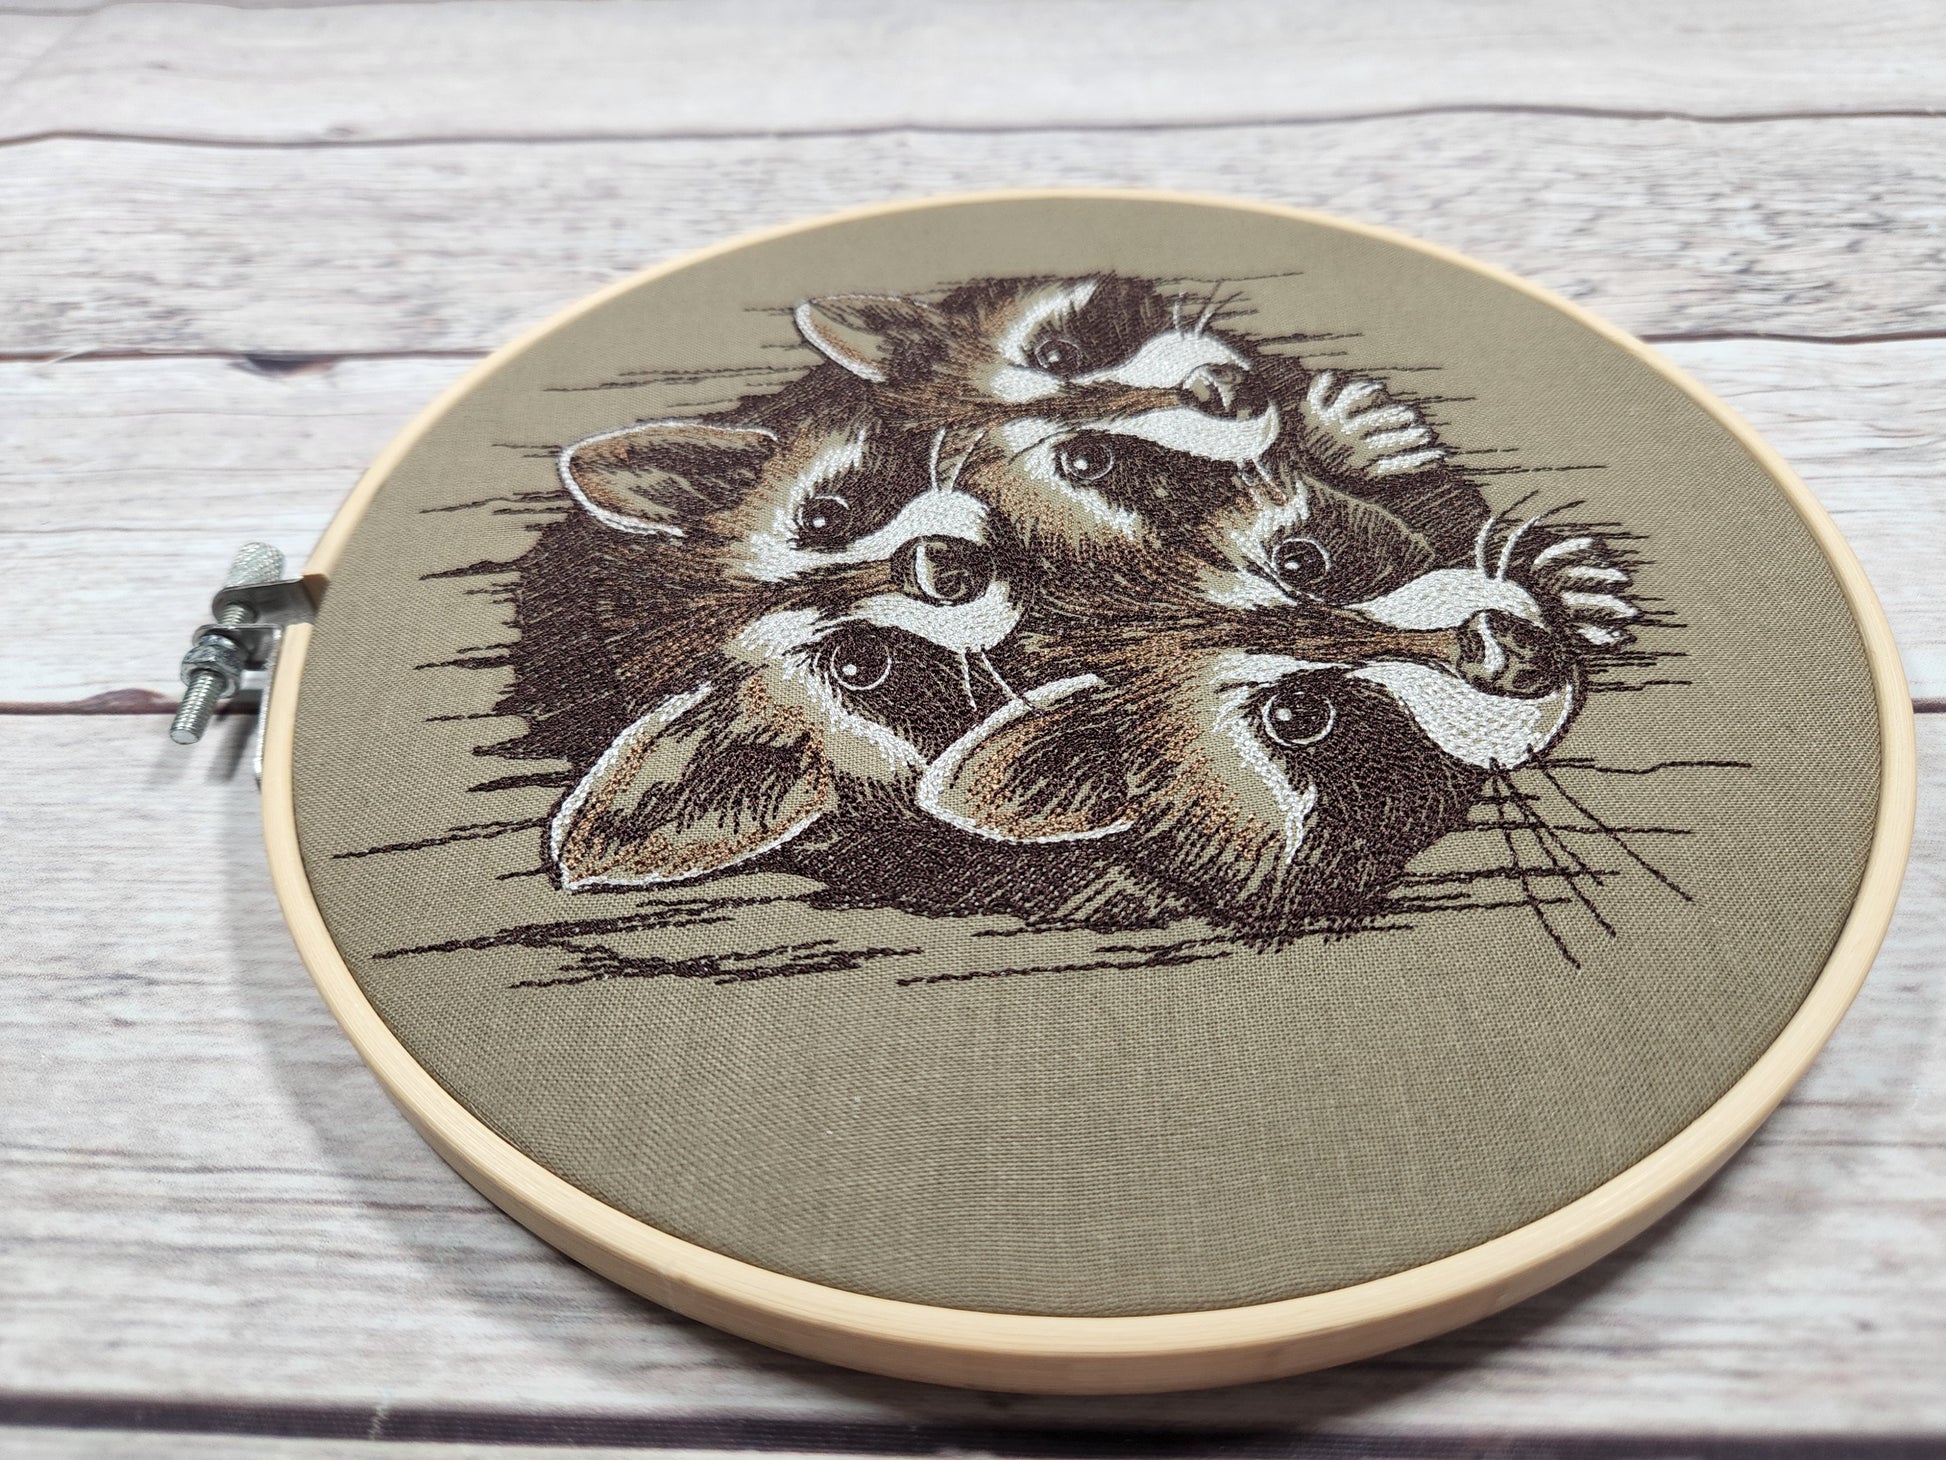 4 inch wall hanging in an embroidery hoop 